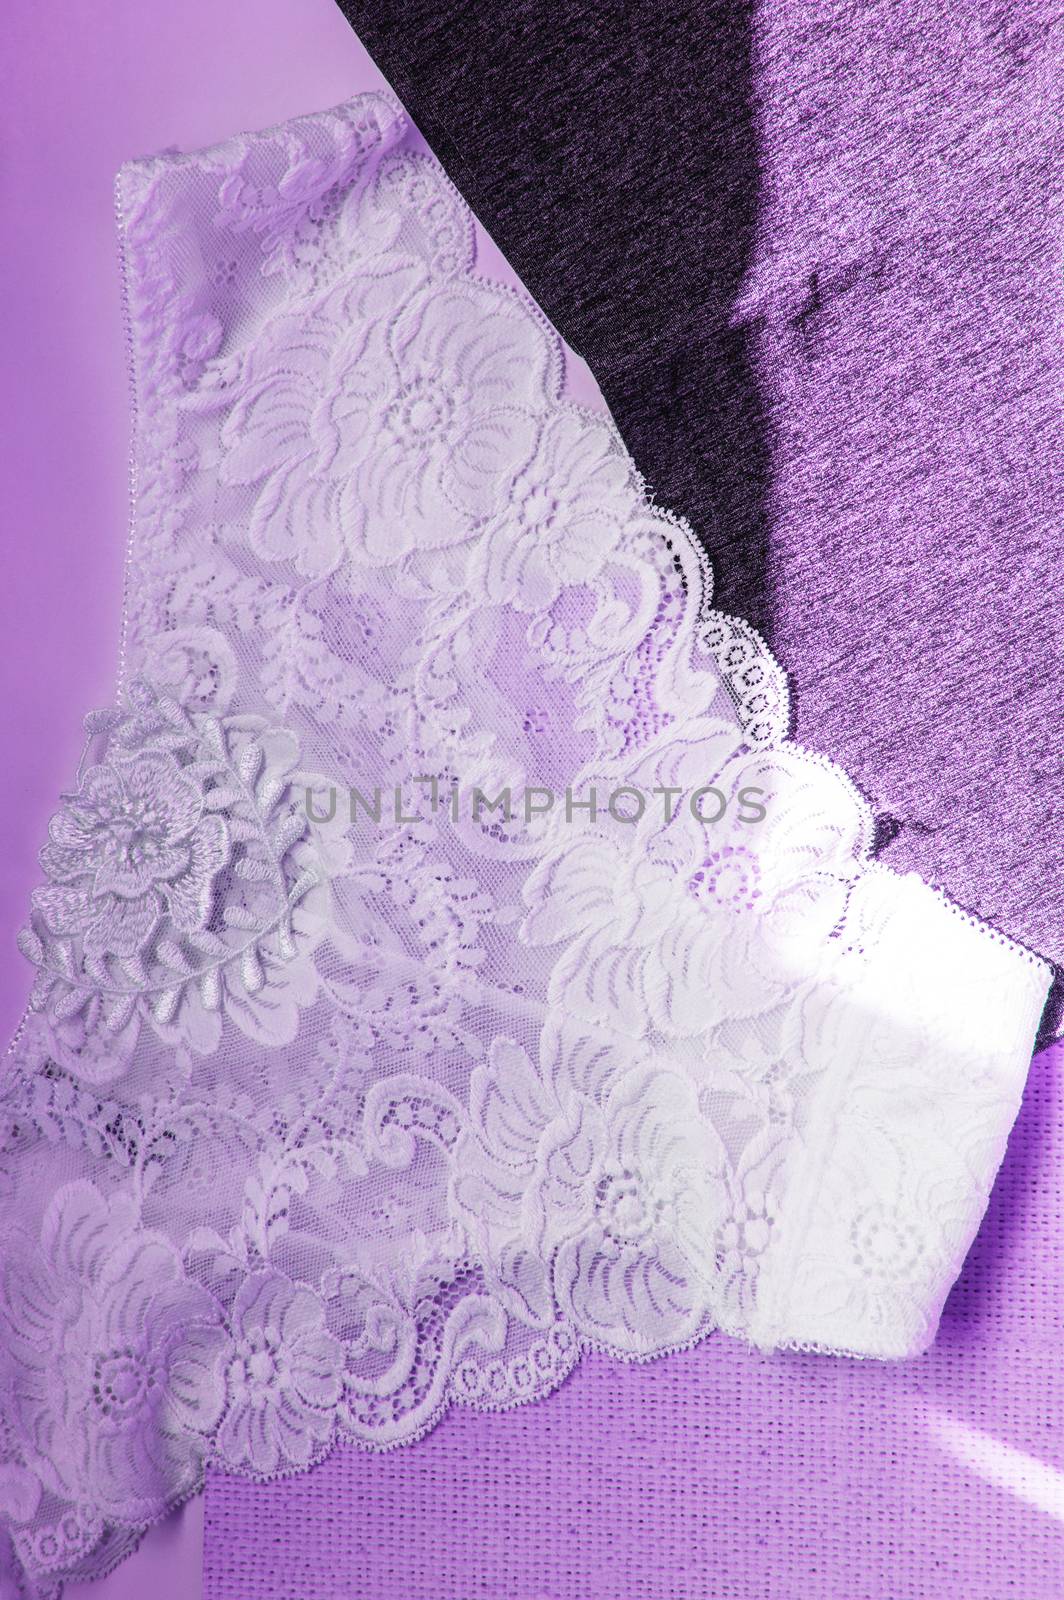 Lacy white sexy women's panties on purple neon background. Vertical shot, top view, flat lay.